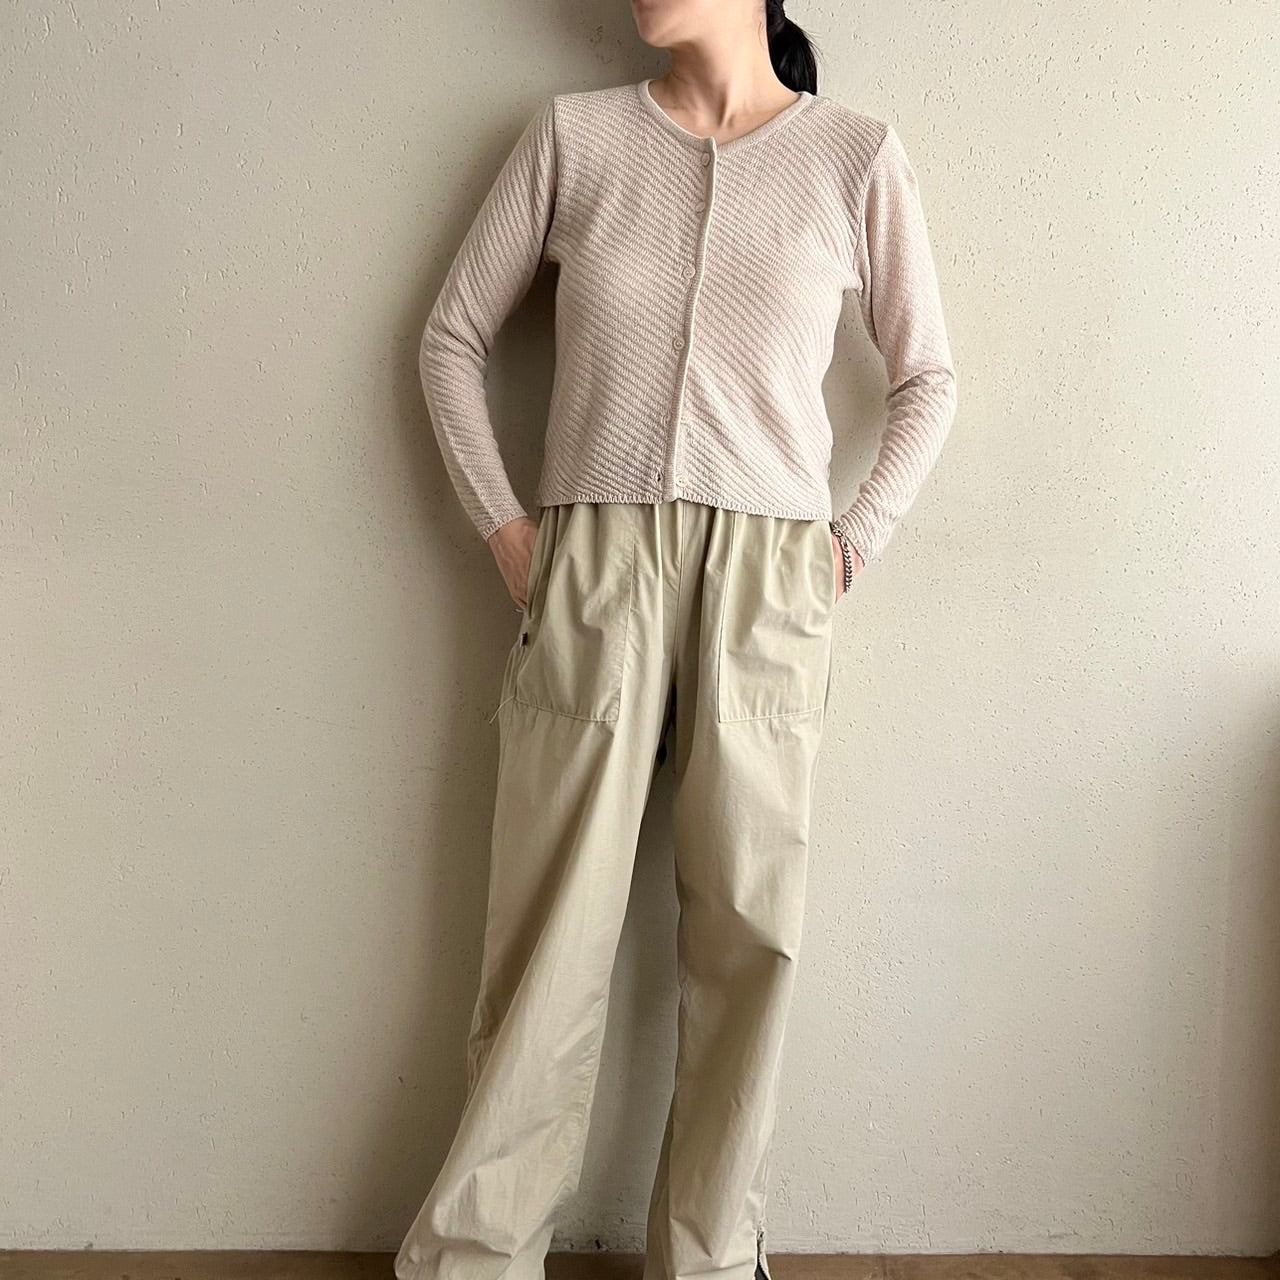 90s "J.CREW" Knit Cardigan Made in USA